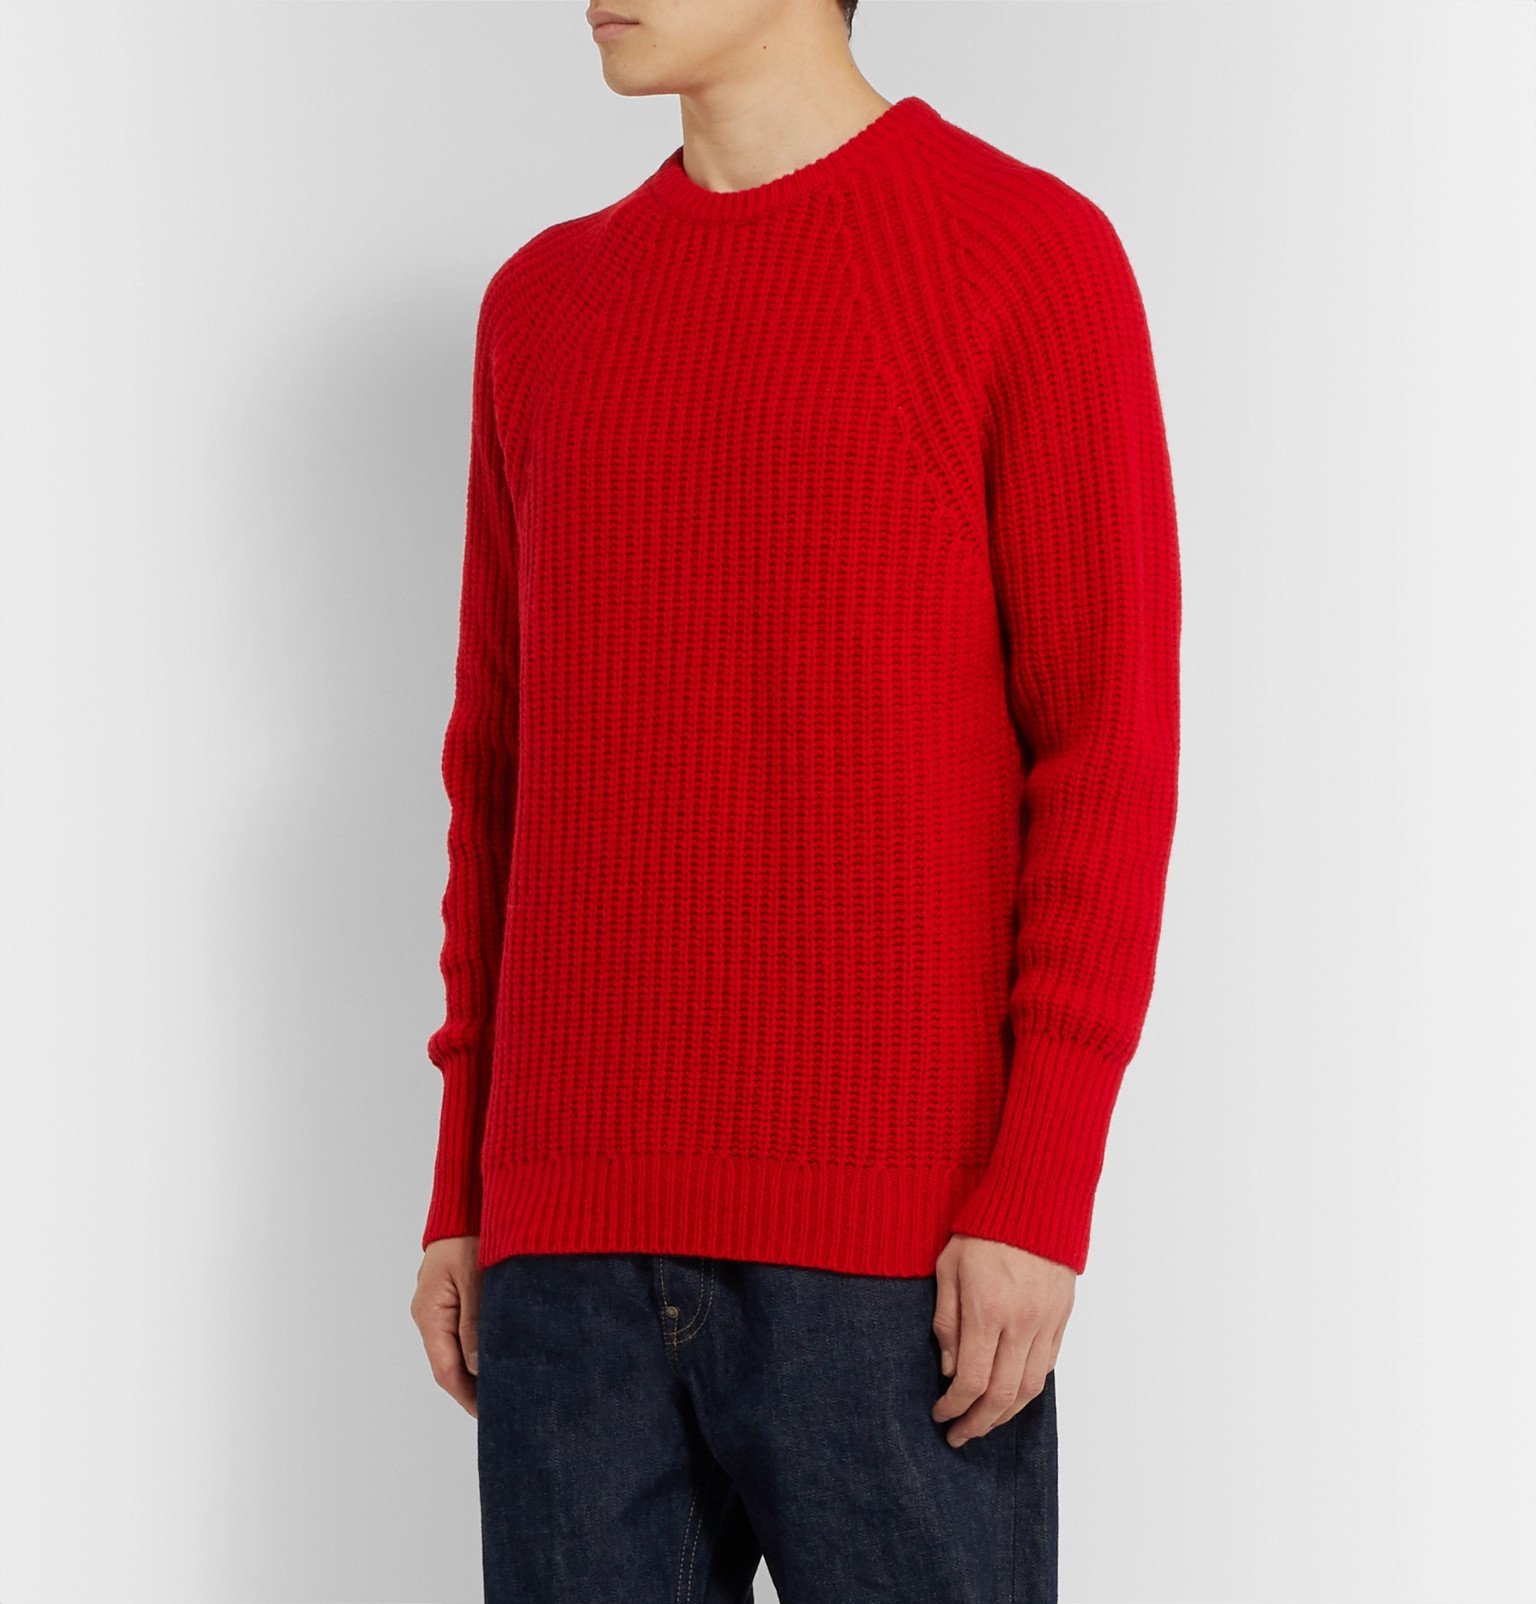 Barbour - Tynedale Ribbed Wool Sweater - Red